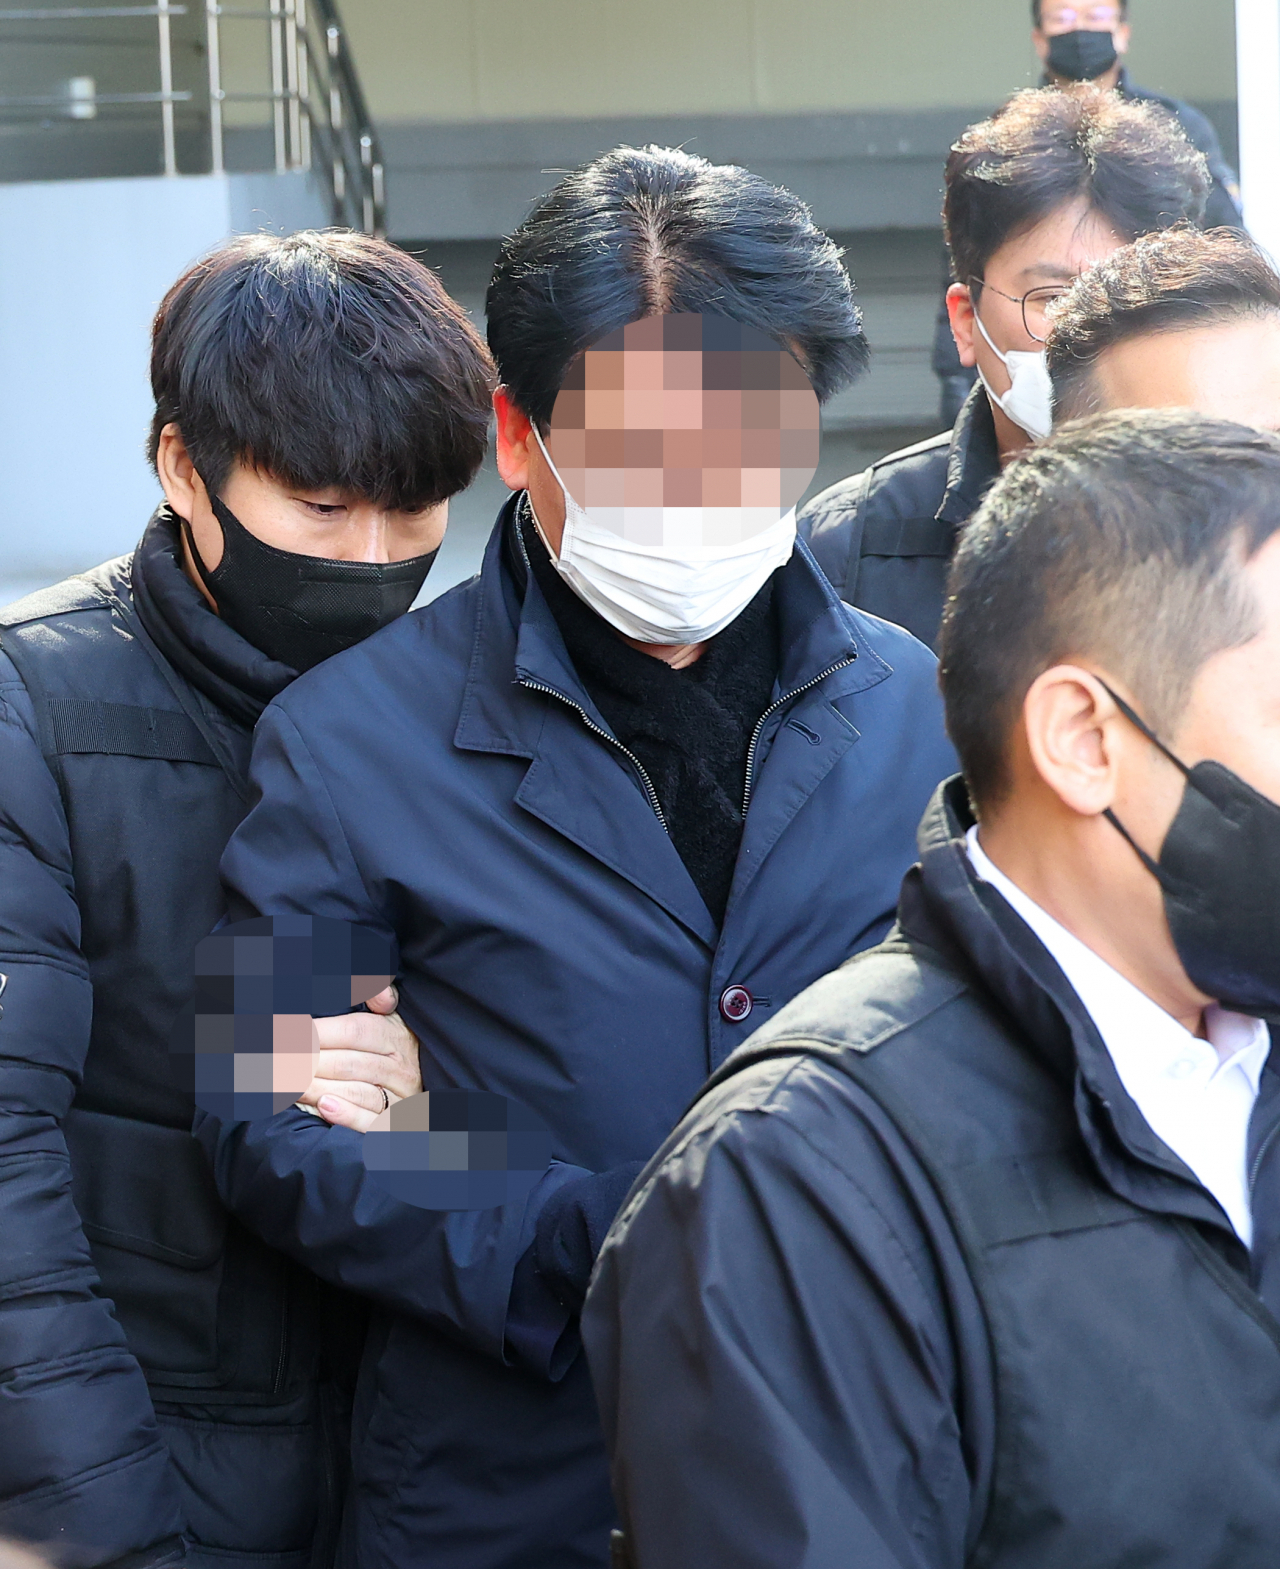 The 67-year-old suspect who stabbed main opposition leader Lee Jae-myung is taken from the Busan Metropolitan Police Agency in Busan on Thursday to attend a review of his arrest warrant at Busan District Court. (Yonhap)